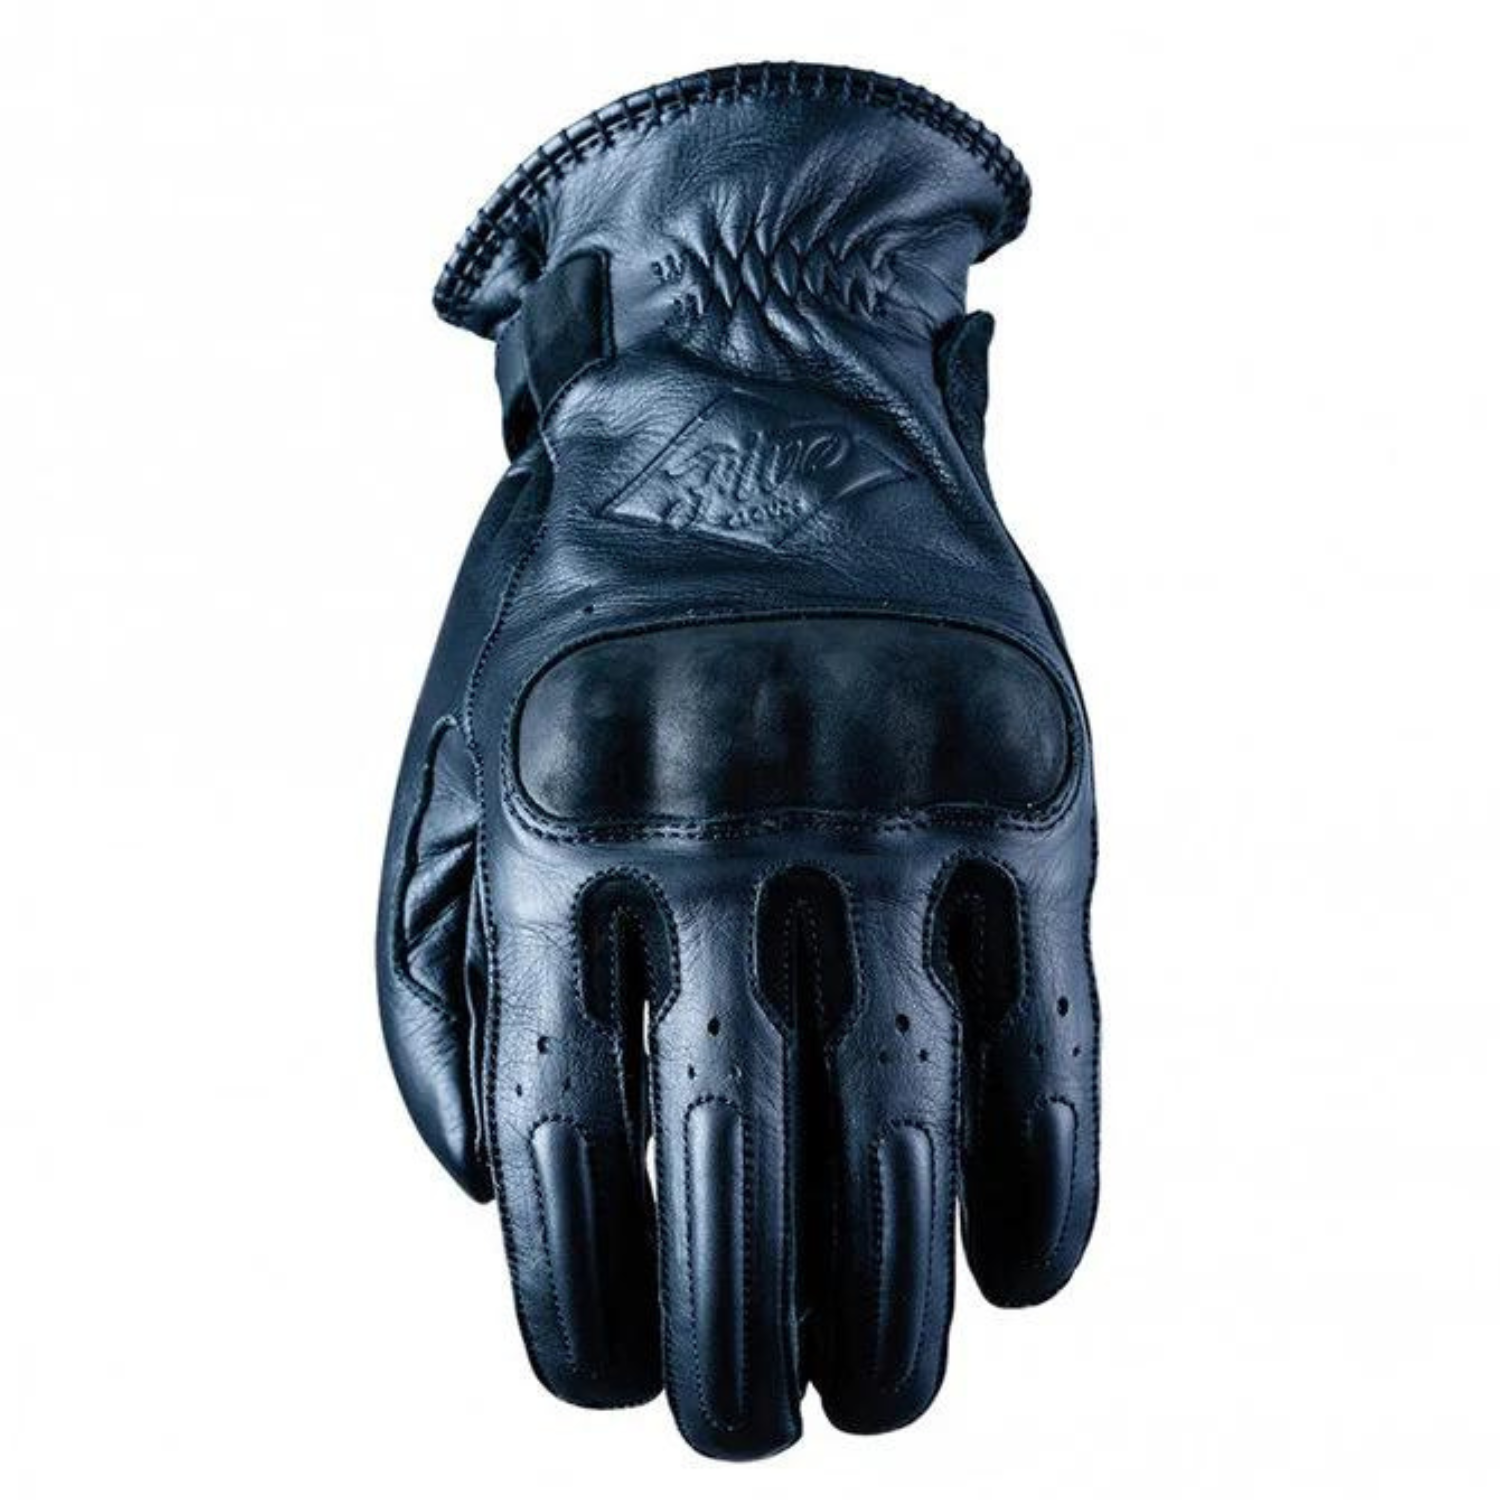 Image of Five Oklahoma Gloves Black Size XL ID 4770916487610